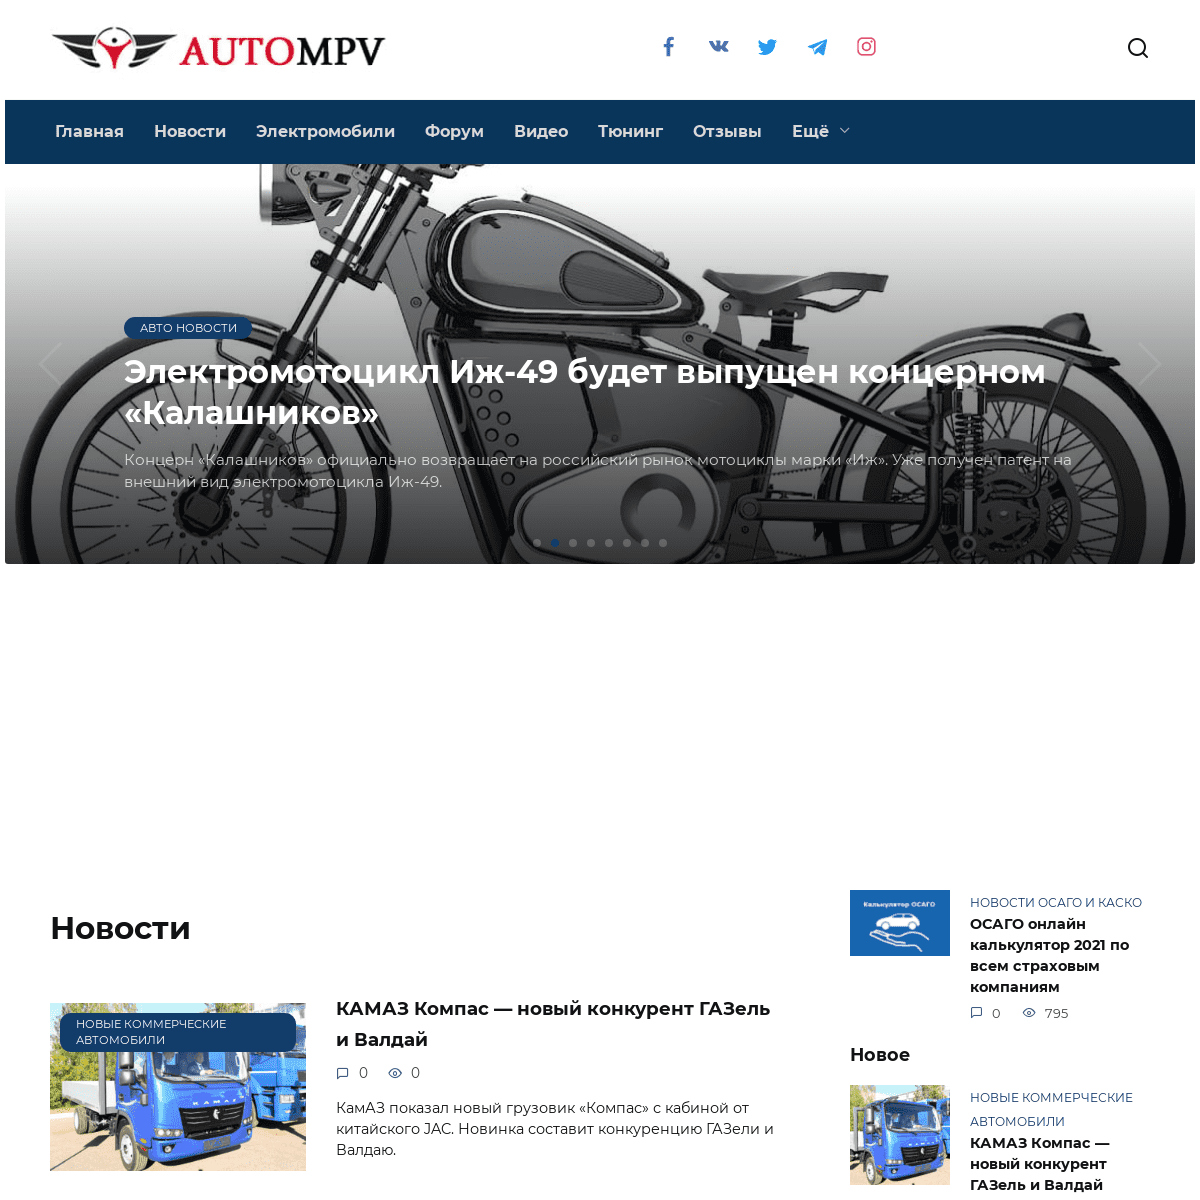 A complete backup of https://autompv.ru